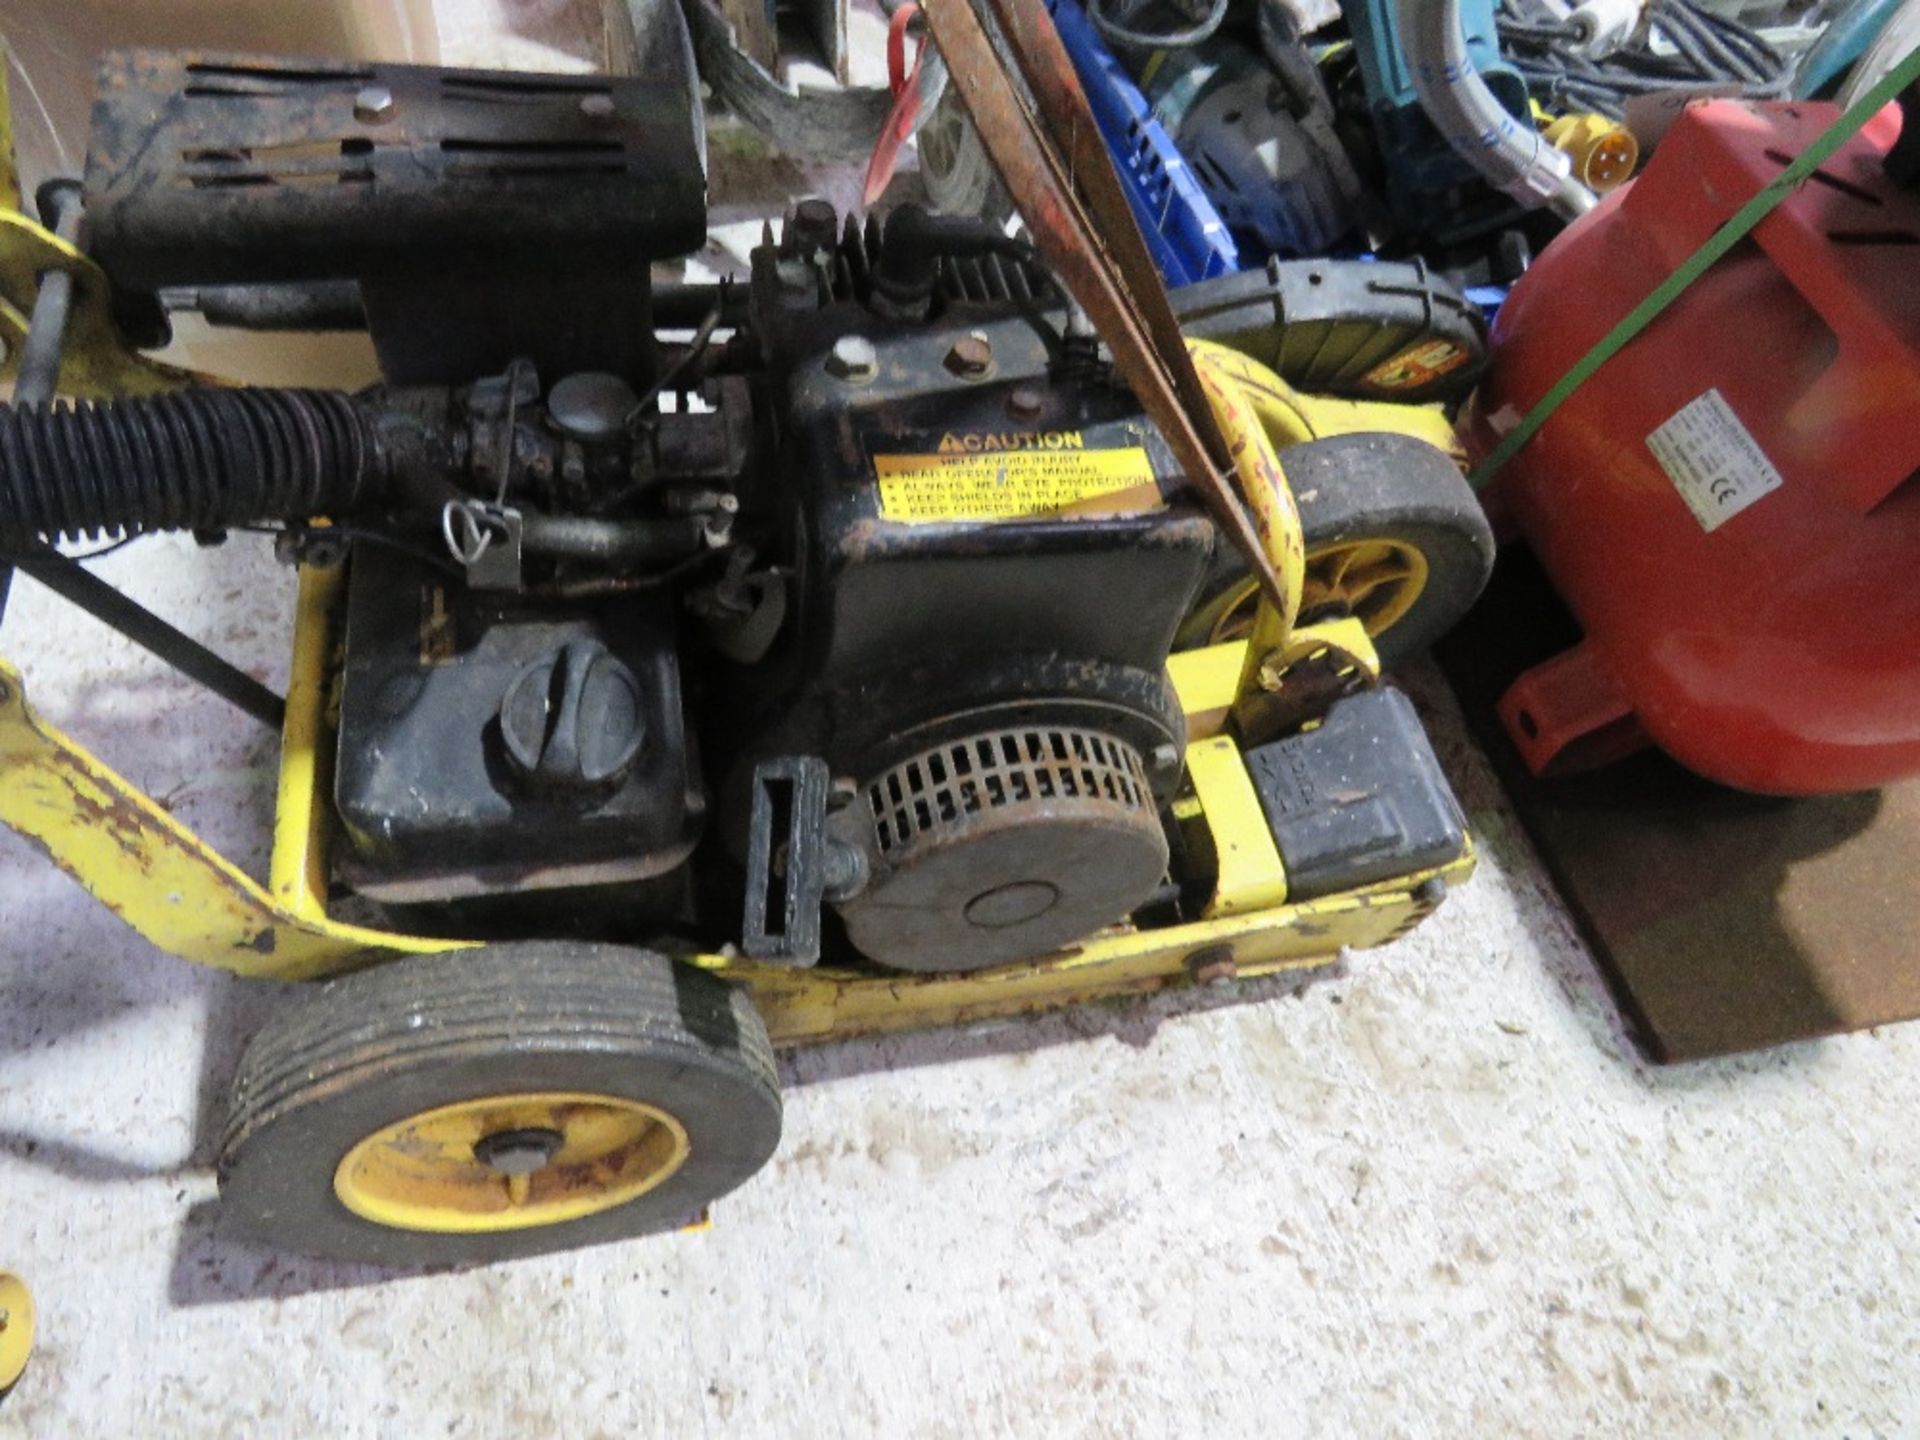 JOHN DEERE E35 PETROL ENGINED LAWN EDGER PLUS 2 X EDGING FORKS.OWNER MOVING HOUSE.....THIS LOT IS SO - Image 2 of 8